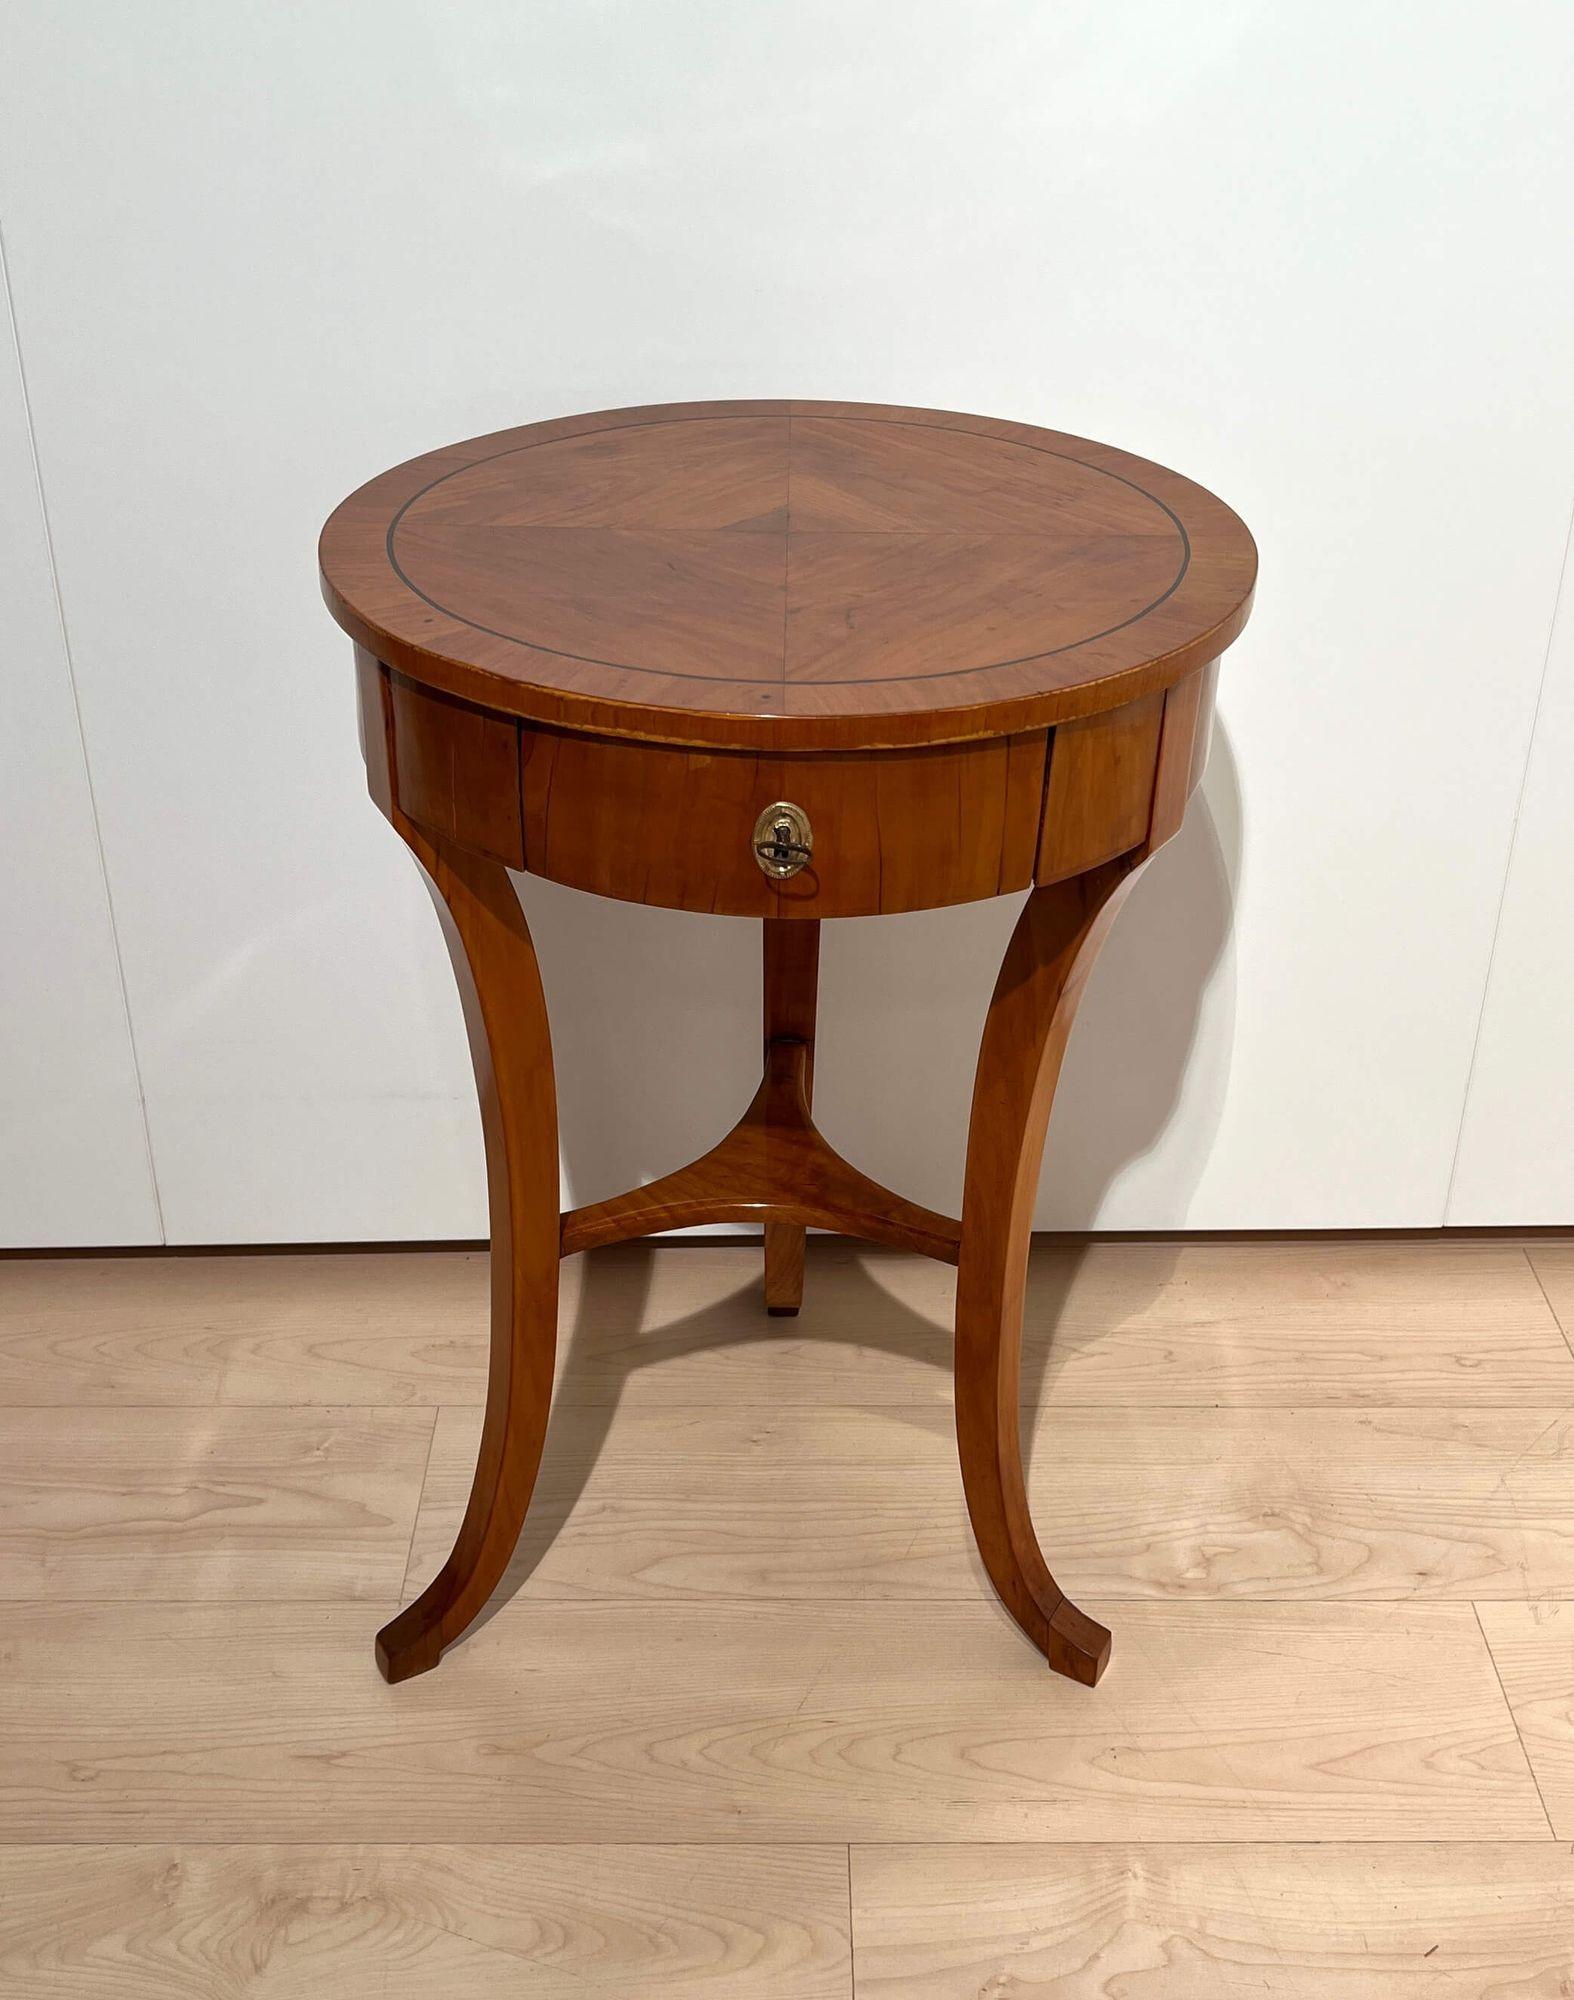 Round three-legged Biedermeier side table, Walnut, South Germany circa 1820.
 
Walnut veneered and solid. Restored and hand polished with shellac. 
Top book-matched veneered with surrounding ebony inlay band. Front centre drawer, lockable.